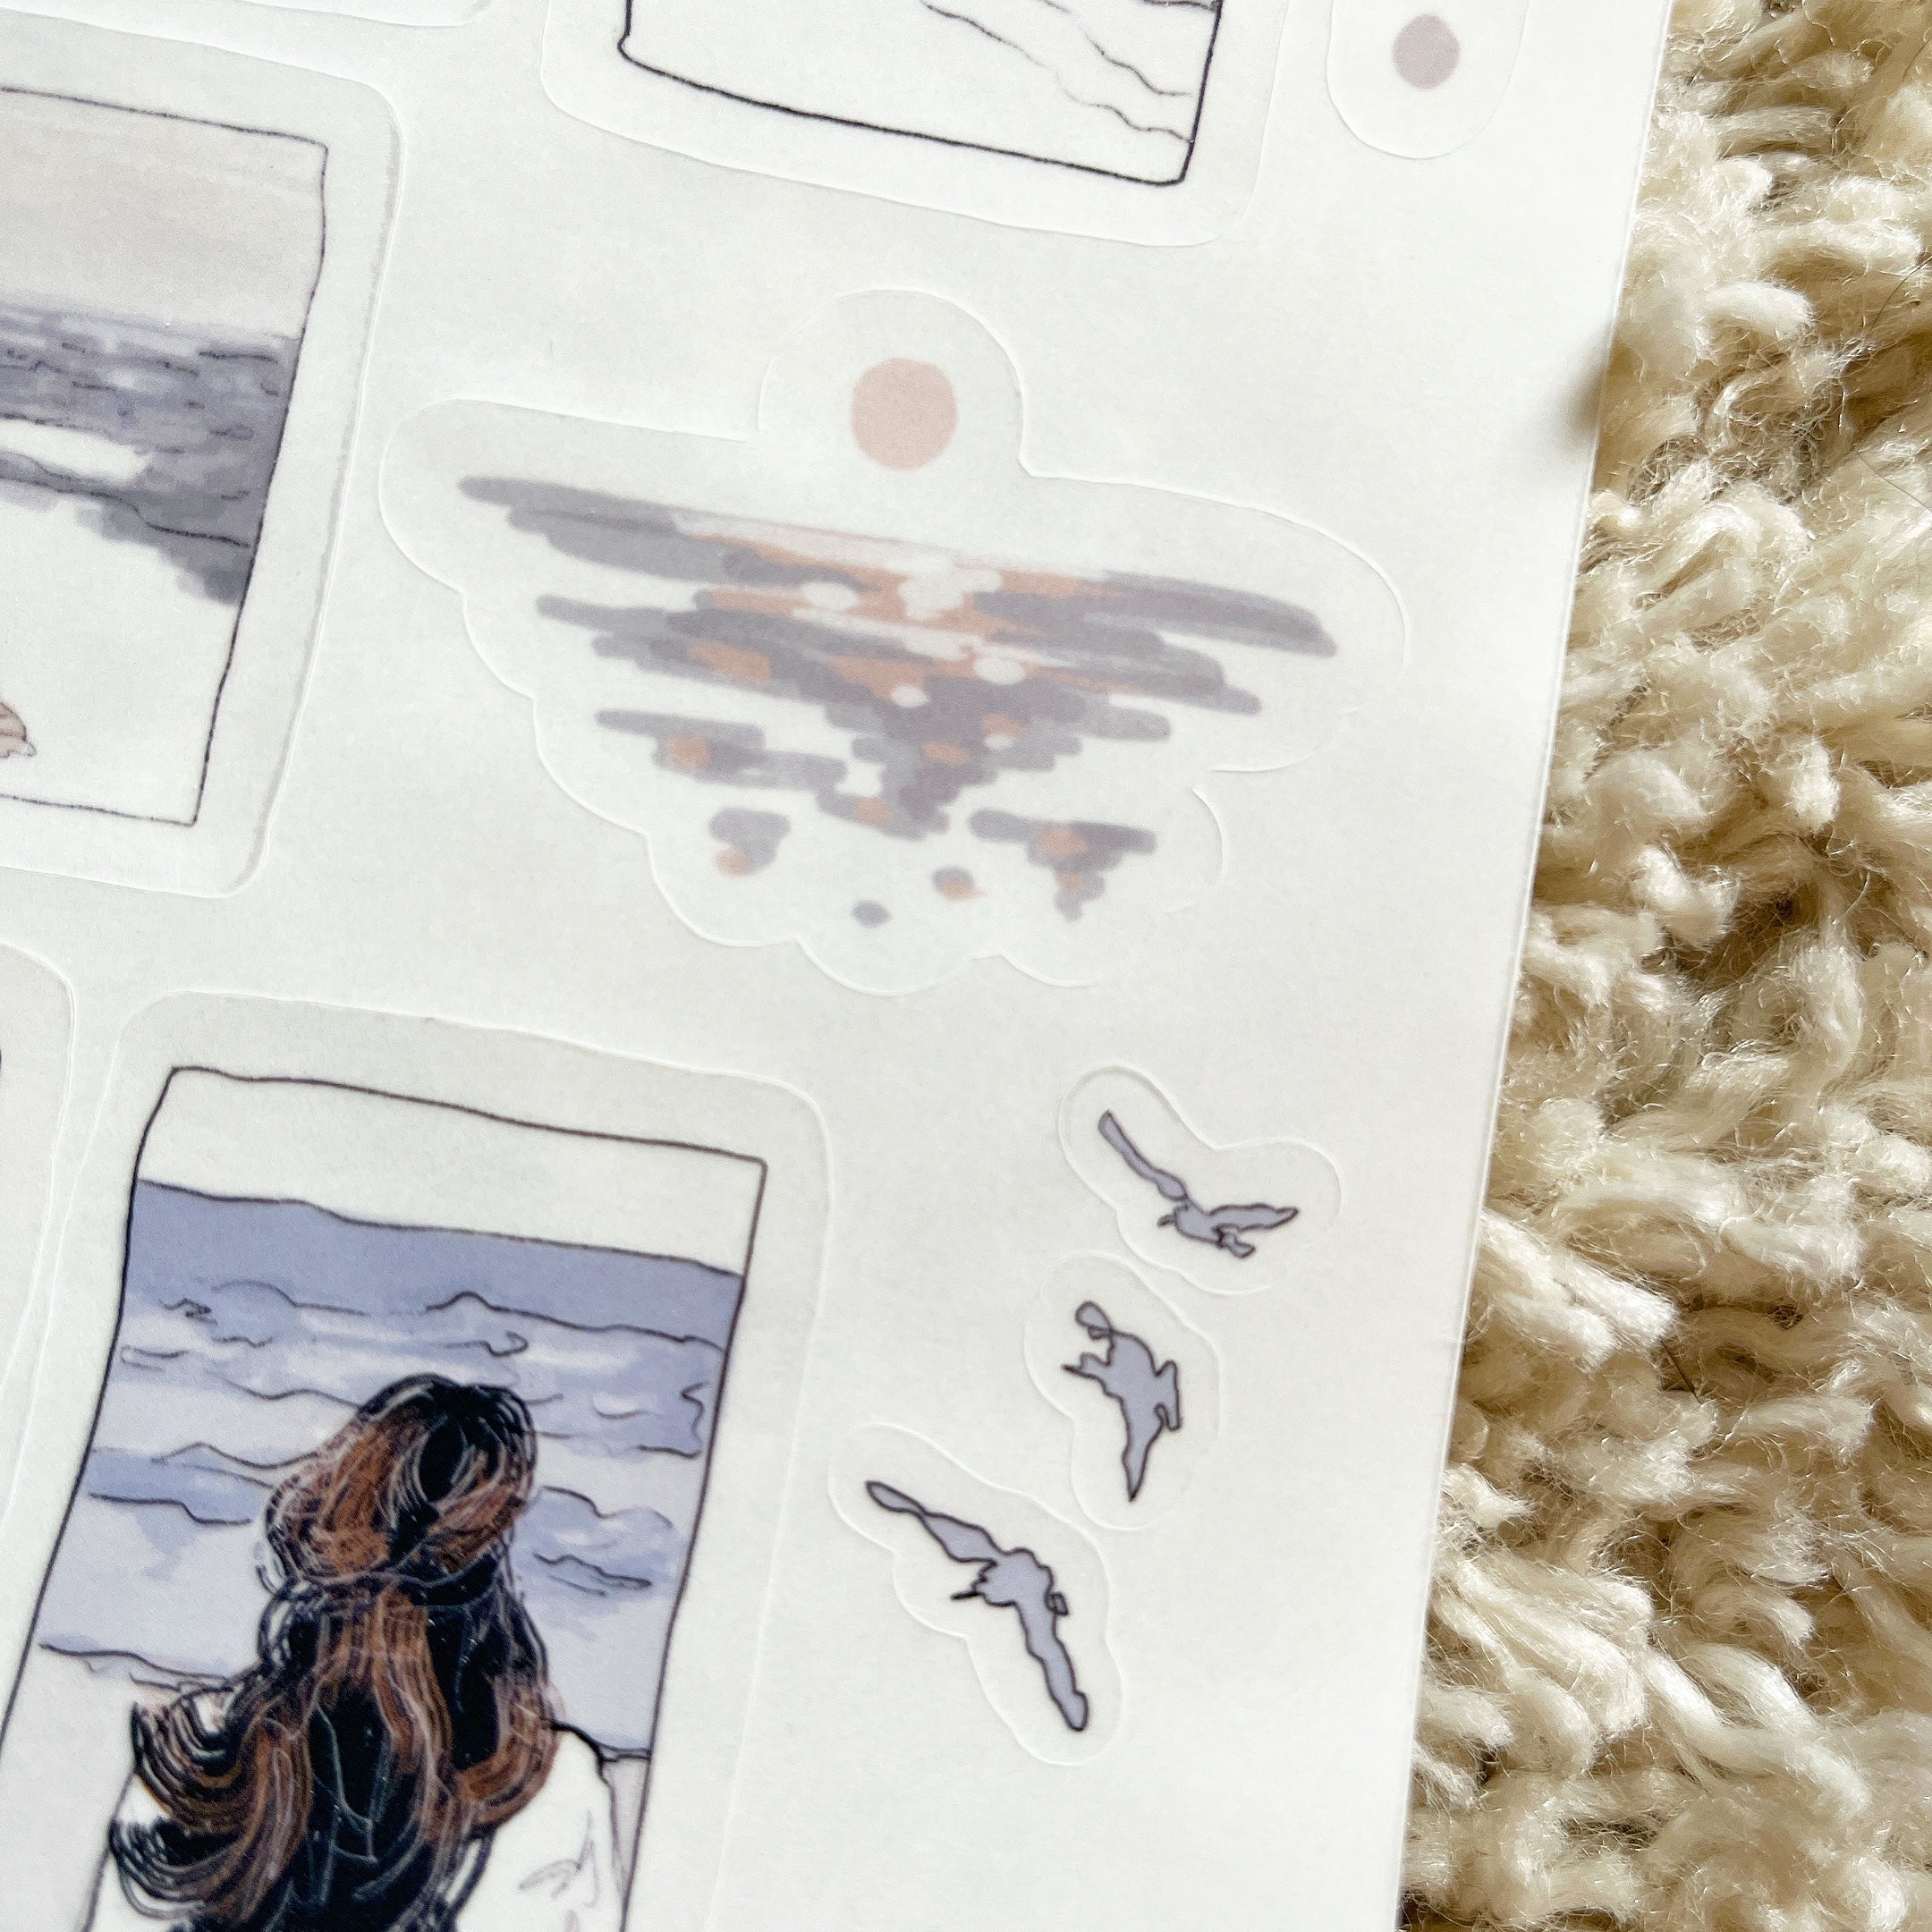 sticker sheet | a day by the sea | self-care | collect beautiful moments